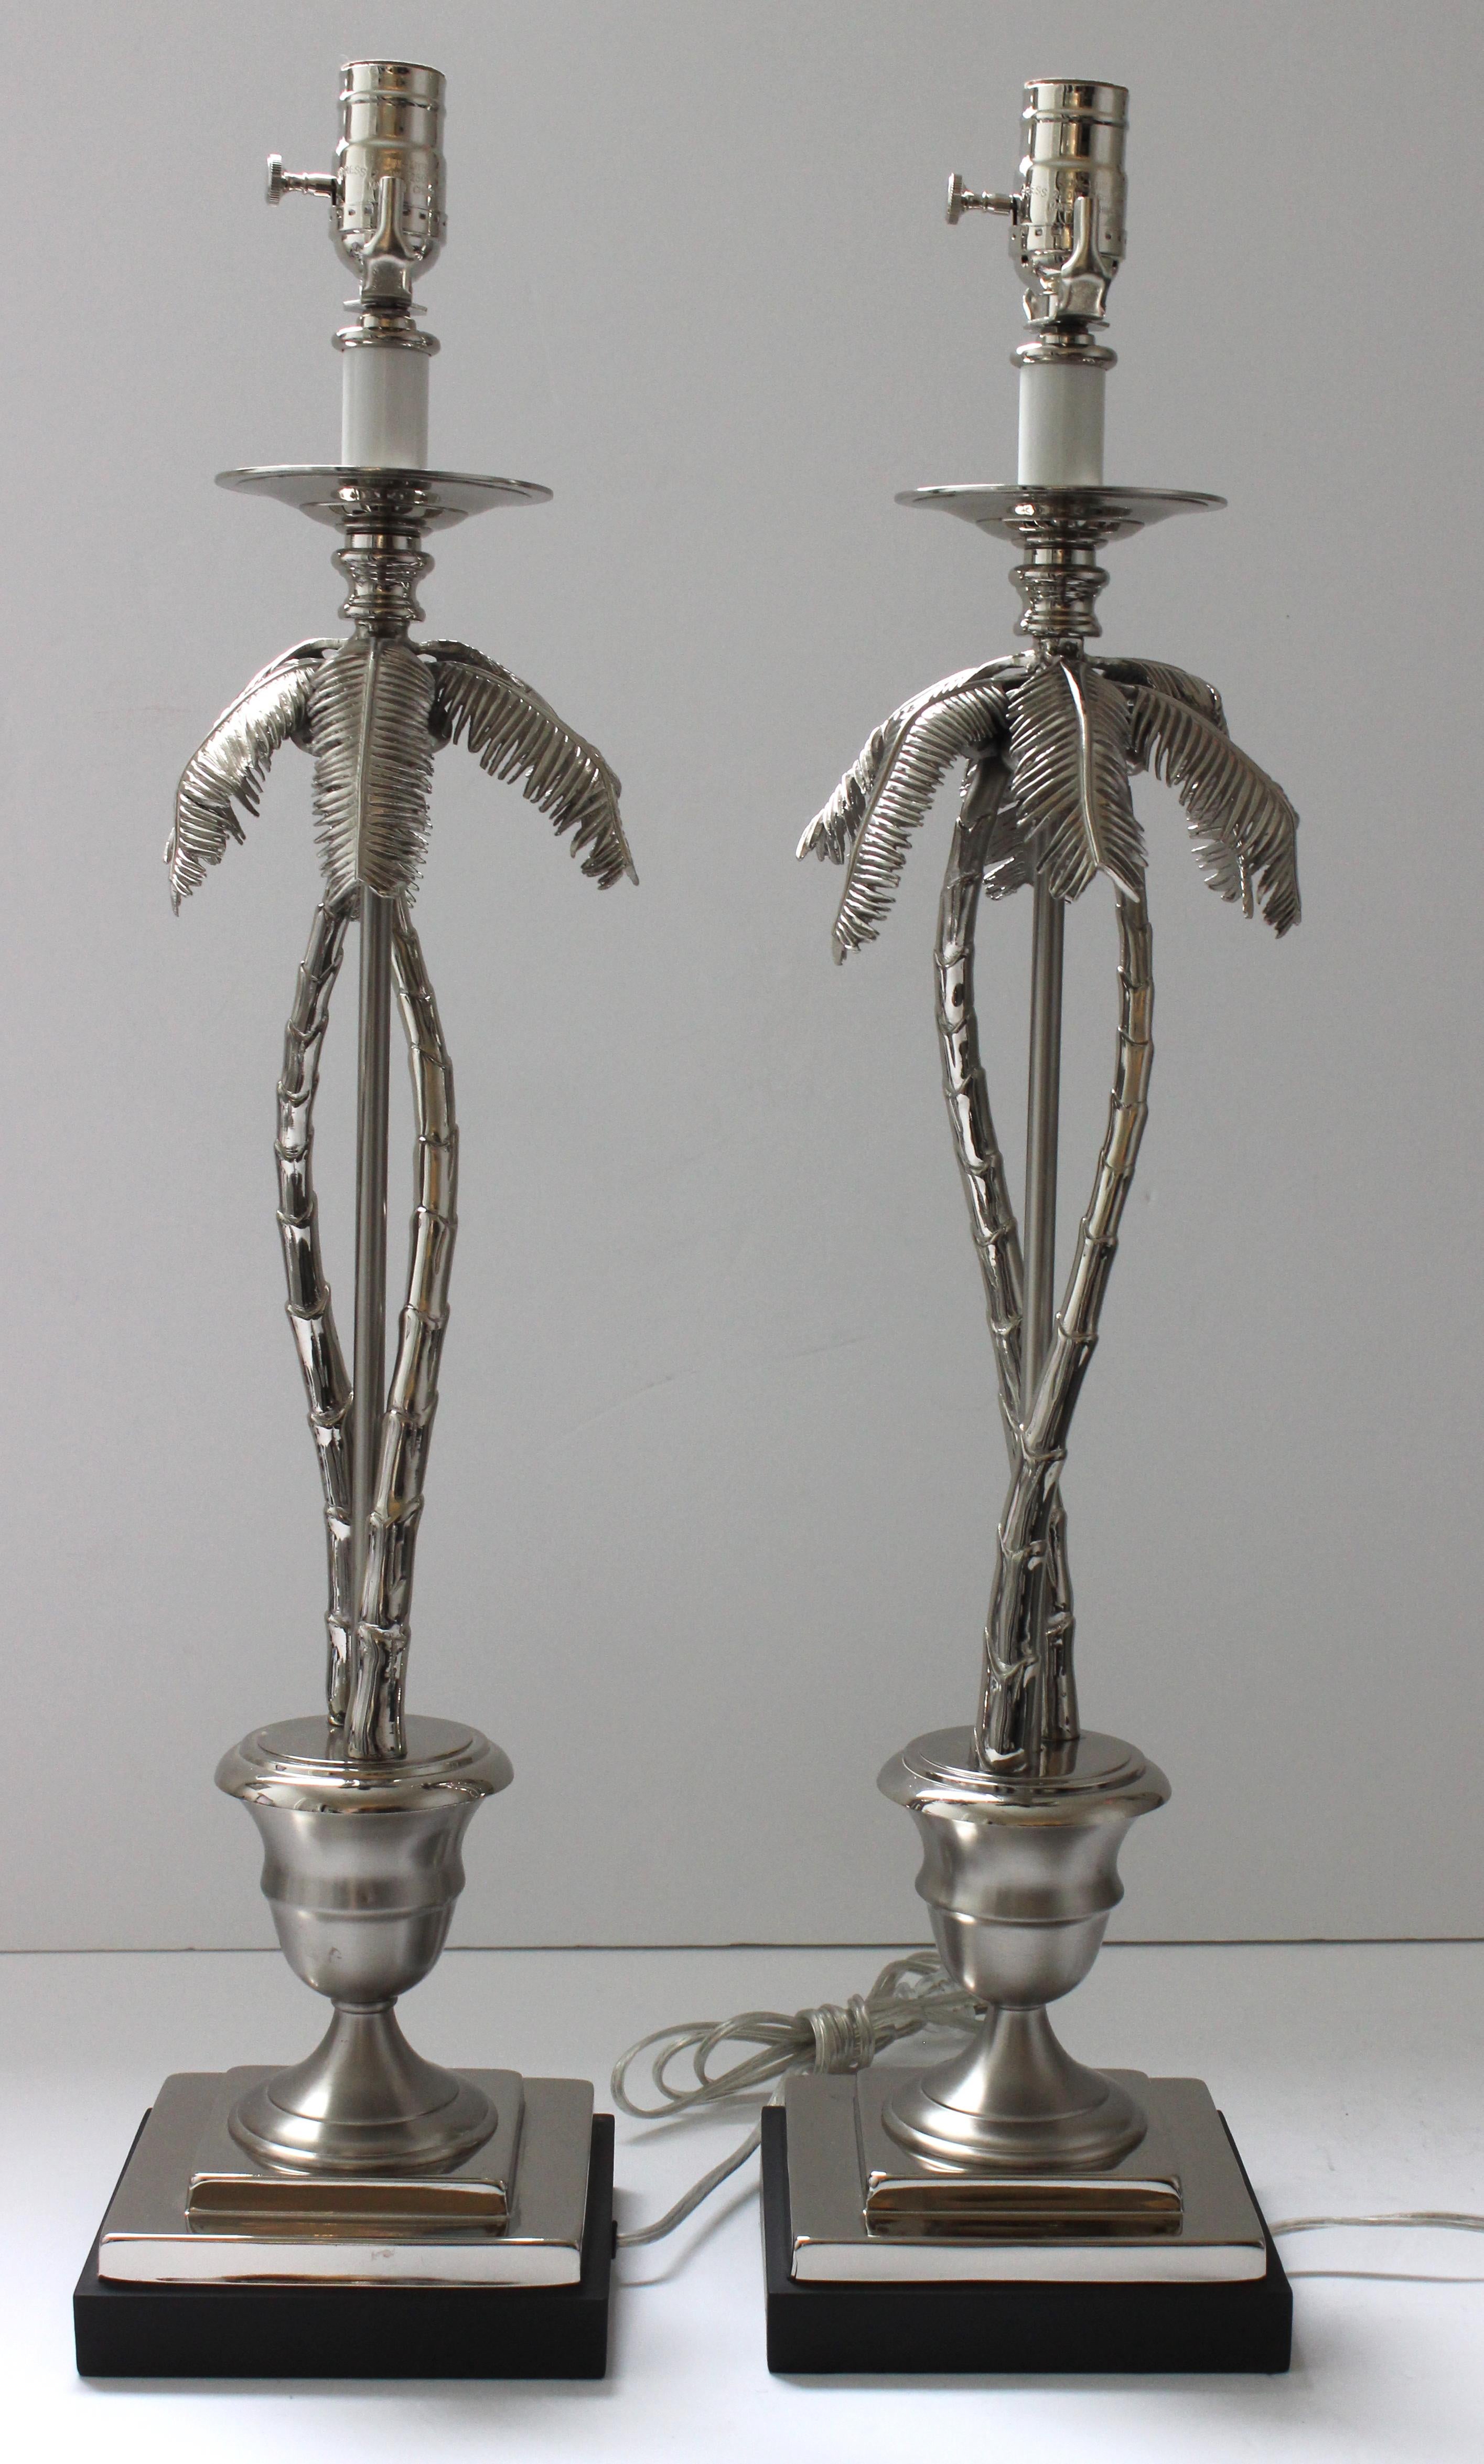 Pair of Nickel Plated Palm Tree Lamps by Angel & Zevallos In Good Condition For Sale In West Palm Beach, FL